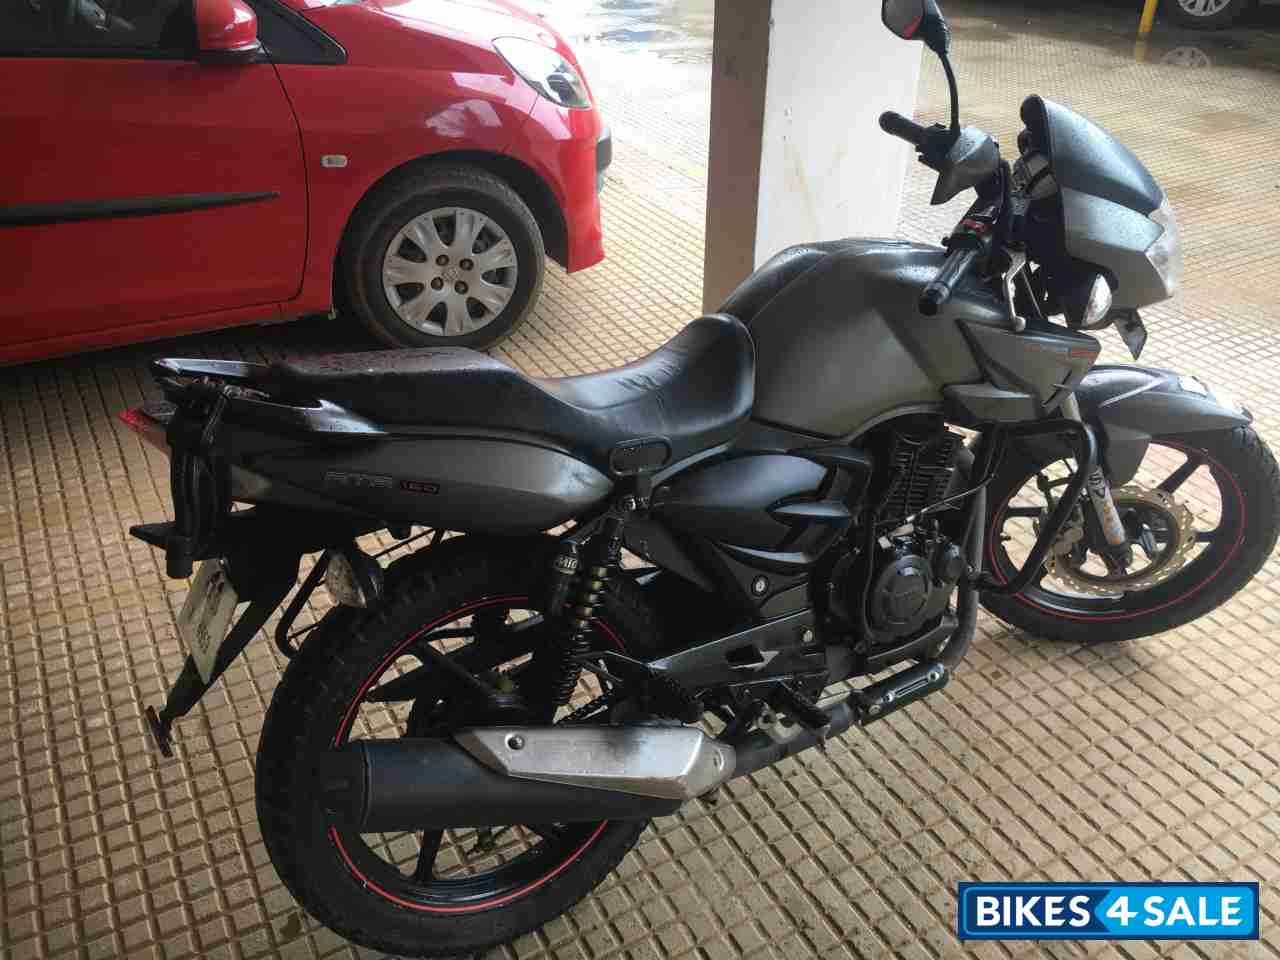 Used 12 Model Tvs Apache Rtr 160 For Sale In Bangalore Id Grey Colour Bikes4sale